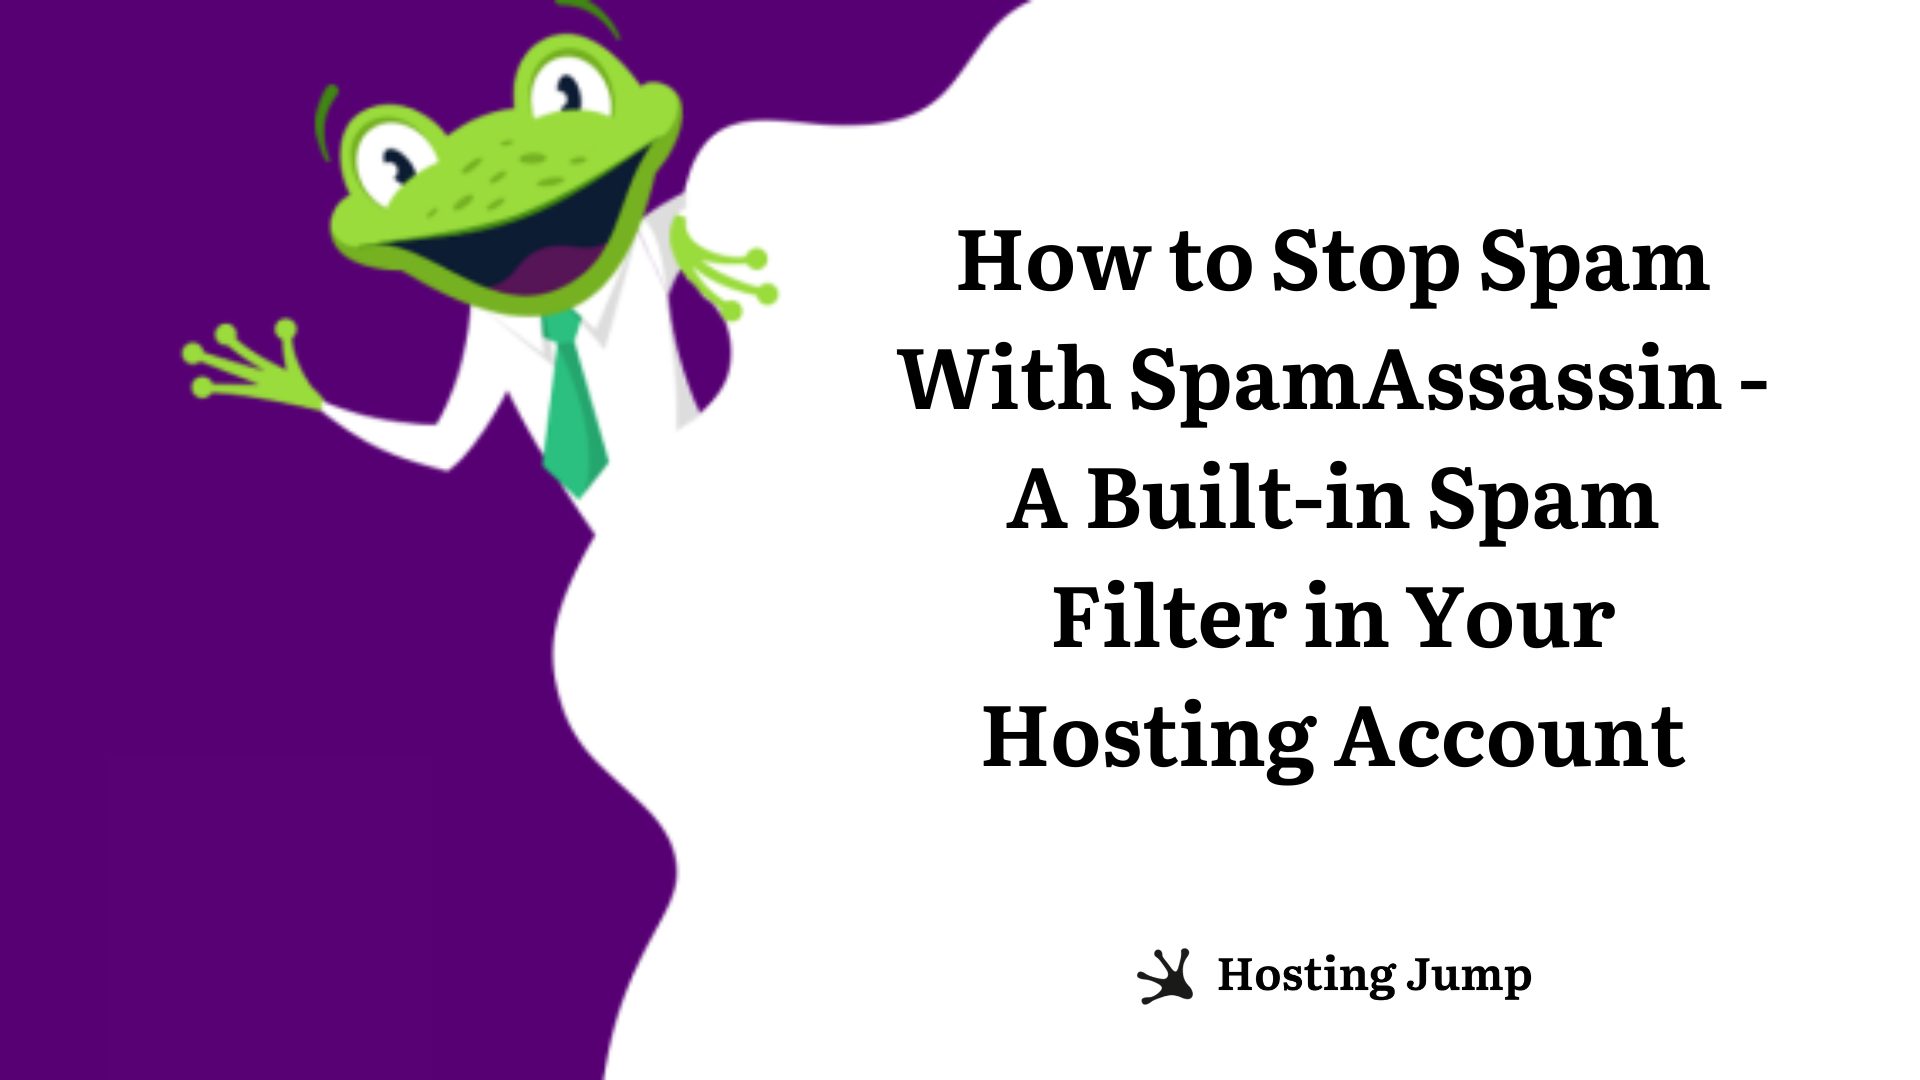 How to Stop Spam With SpamAssassin - A Built-in Spam Filter in Your Hosting Account